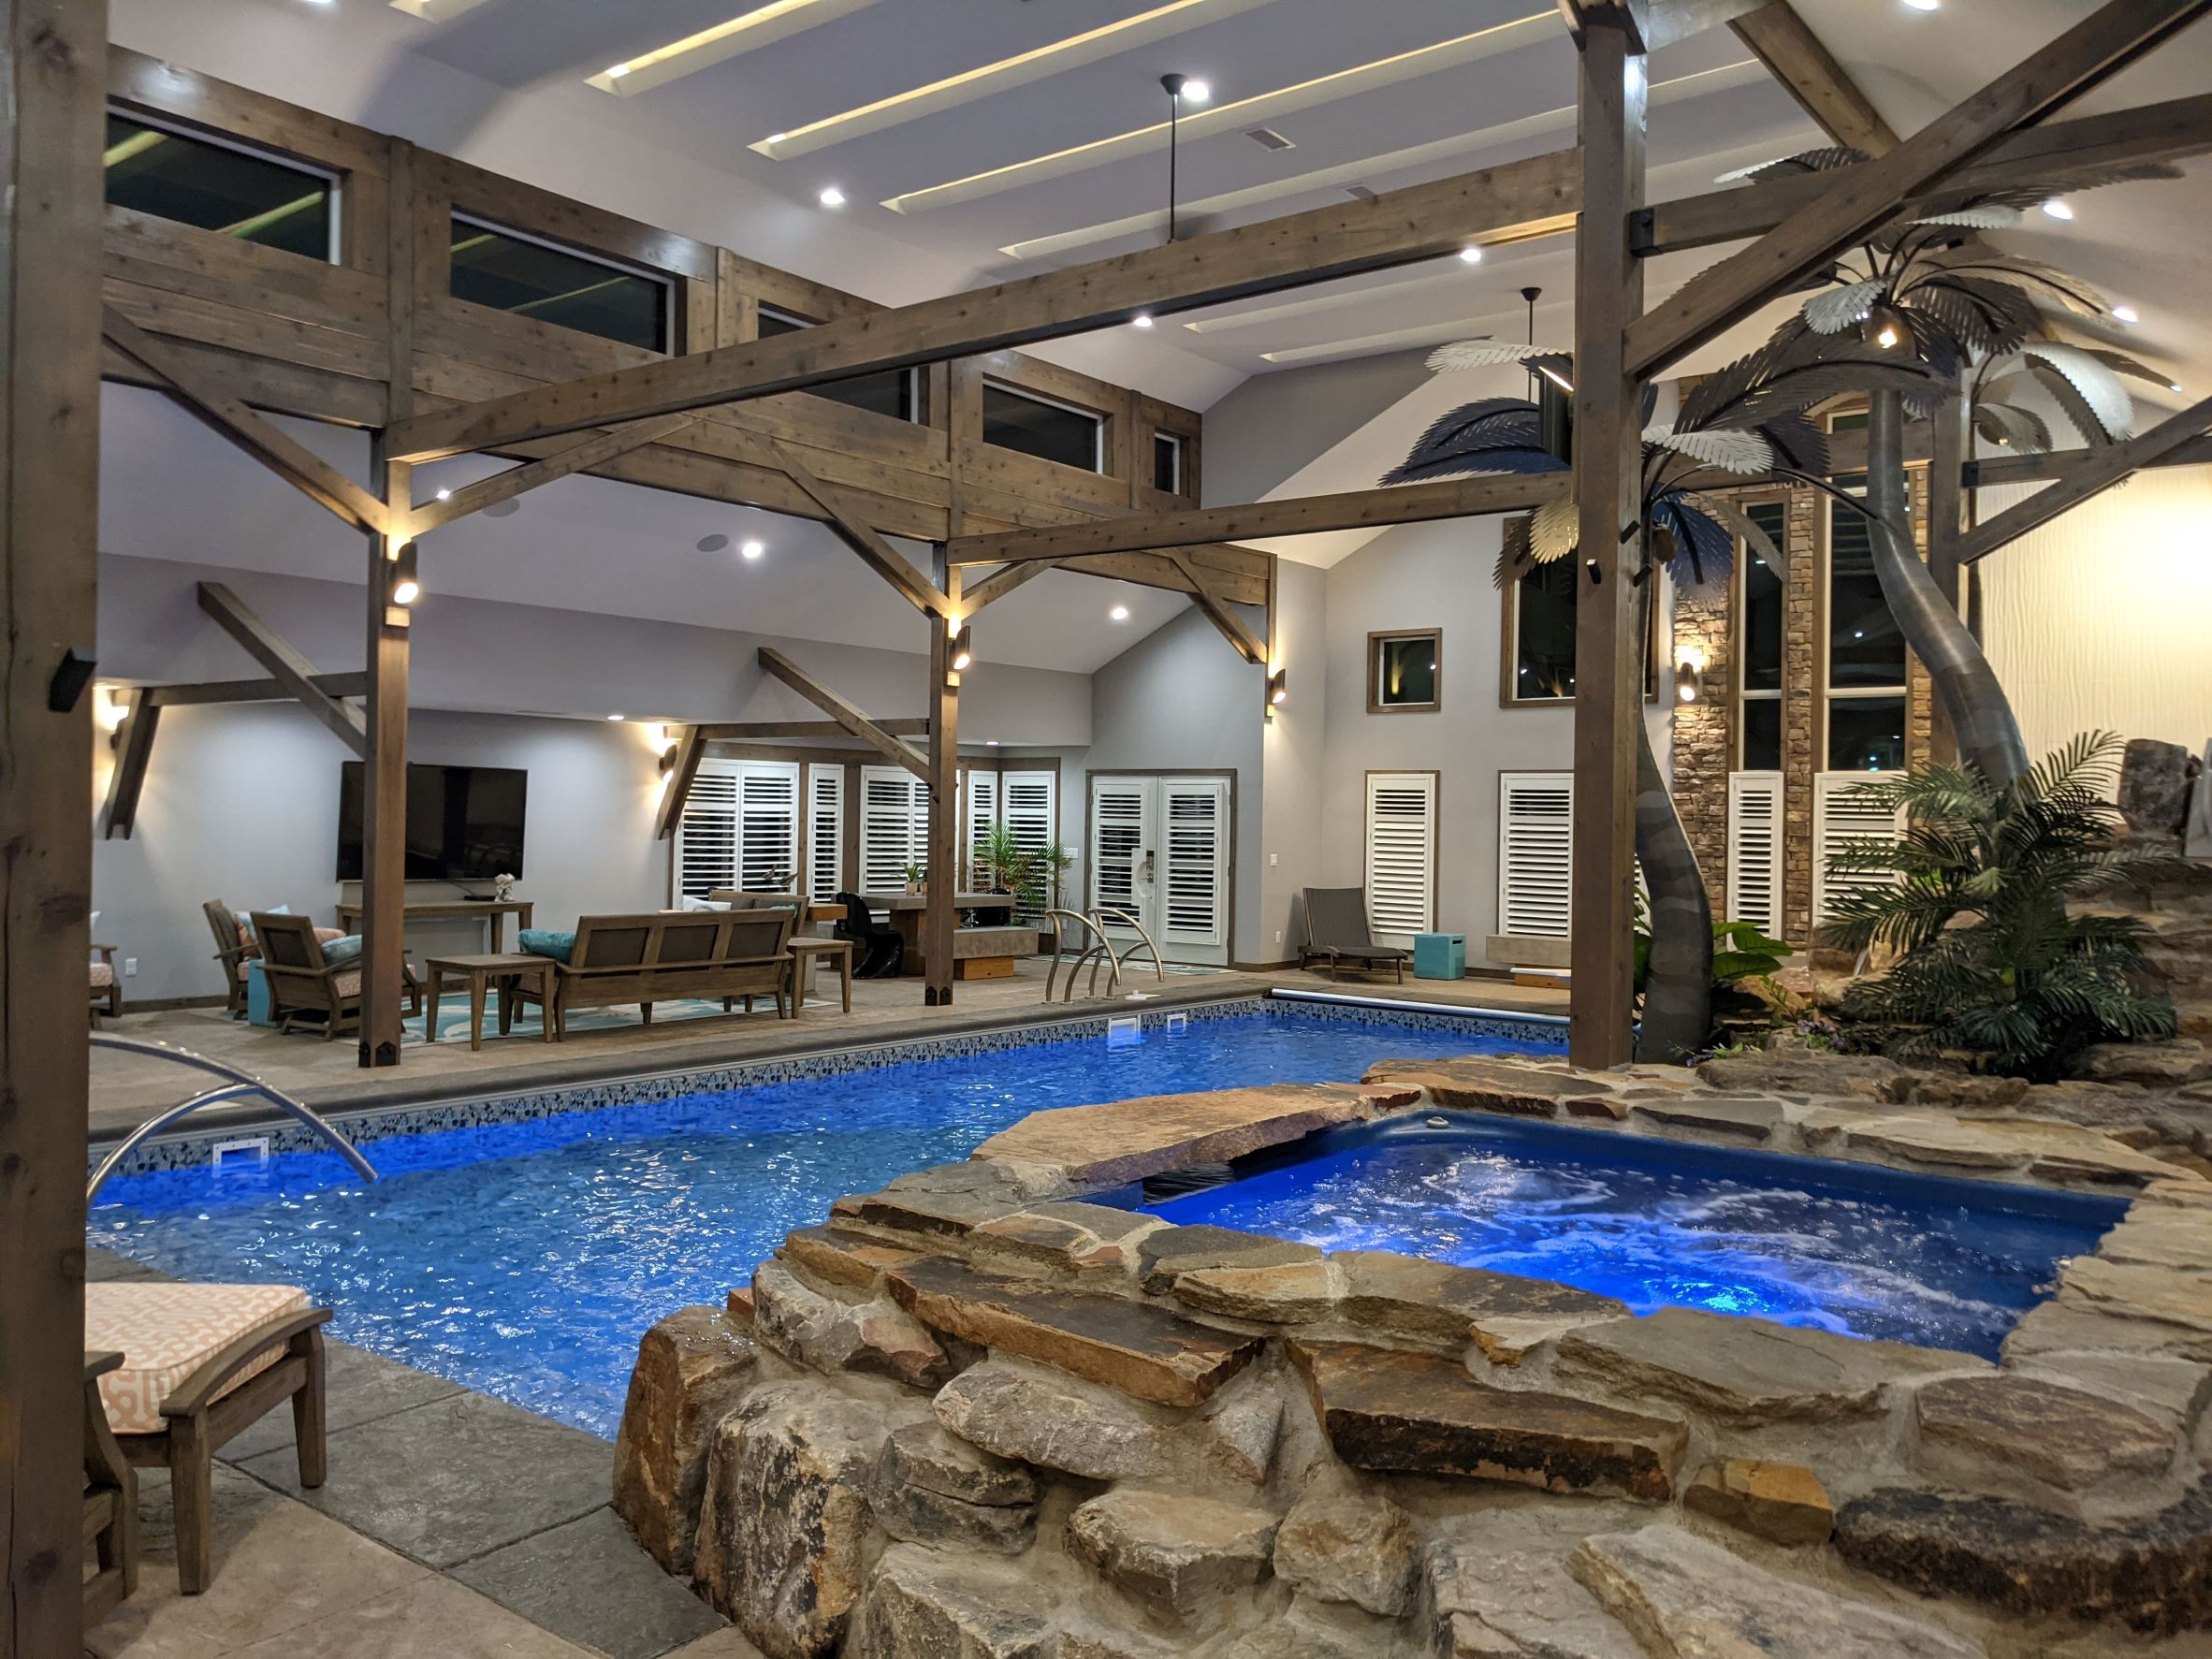 Interior View of Residential Pool Addition to Private Home with hot tub in foreground with stone with swimming pool and waterfall in background and palm trees, wood timber beams and columns outside of Pittsburgh Pennsylvania